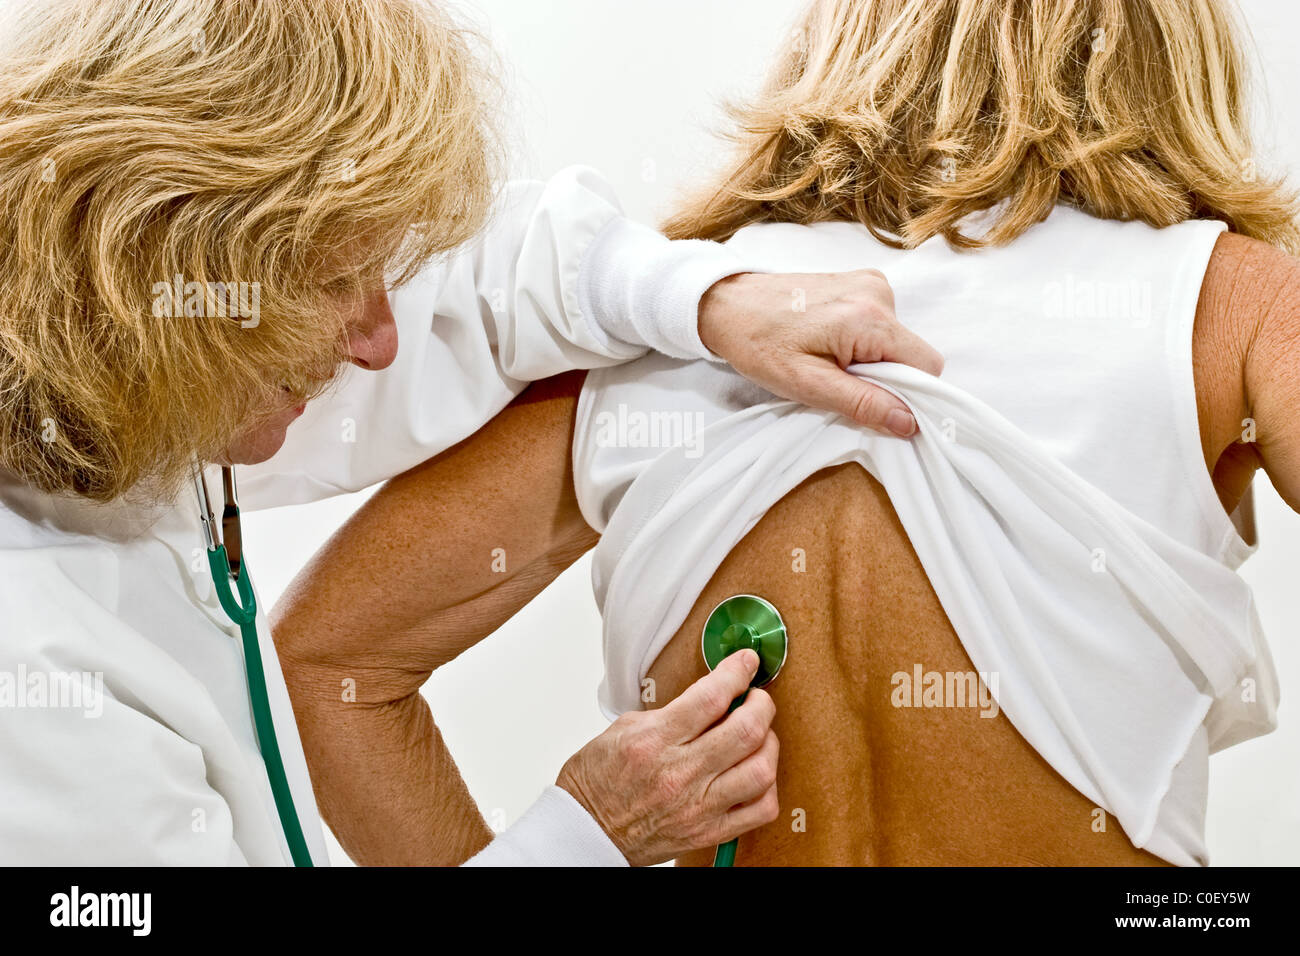 Female doctor checking the heartbeat of another woman with a stethoscope Stock Photo